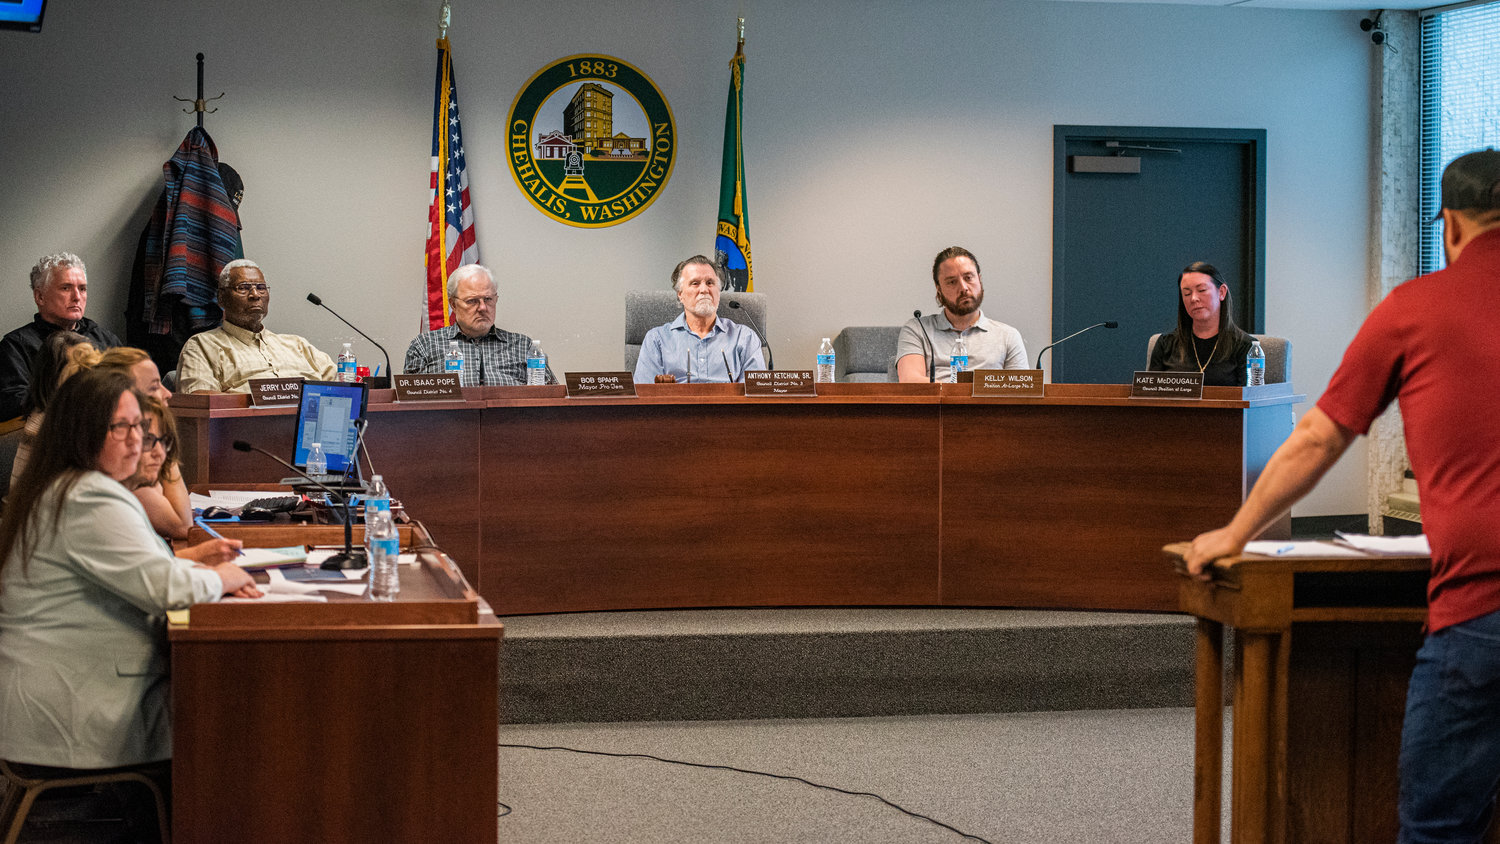 FILE PHOTO — City council members listen to attendees speak at the podium during a meeting in Chehalis.